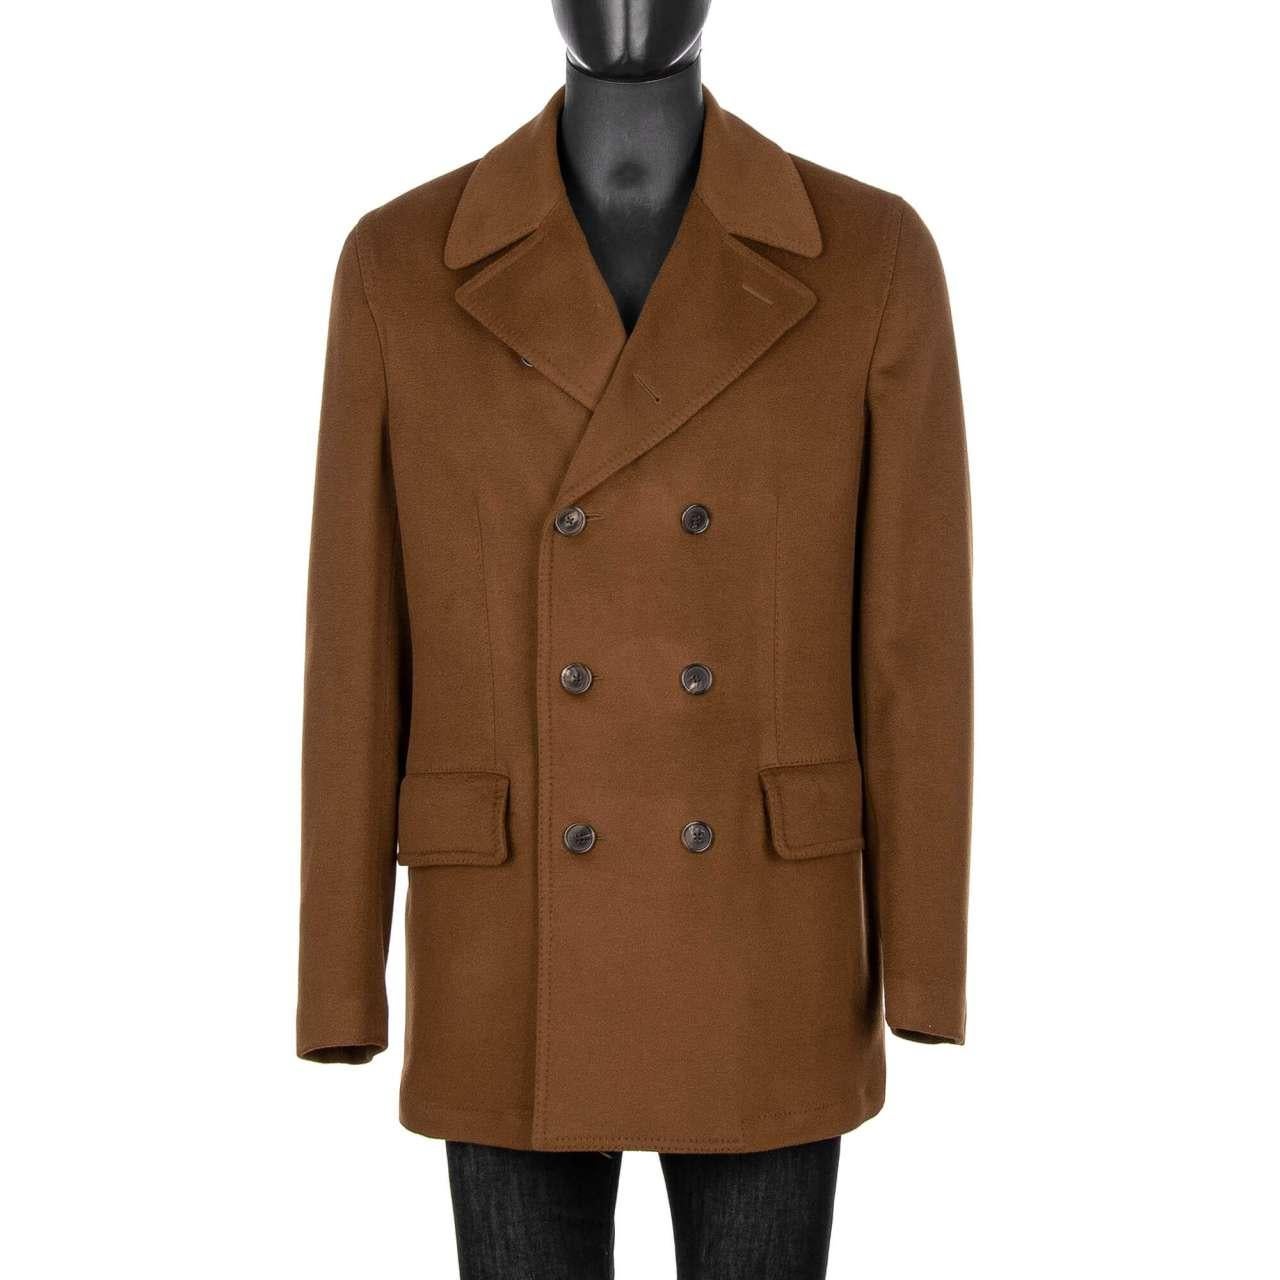 Dolce & Gabbana - Double-Breasted Cashmere Coat Camel Brown 58 In Excellent Condition For Sale In Erkrath, DE